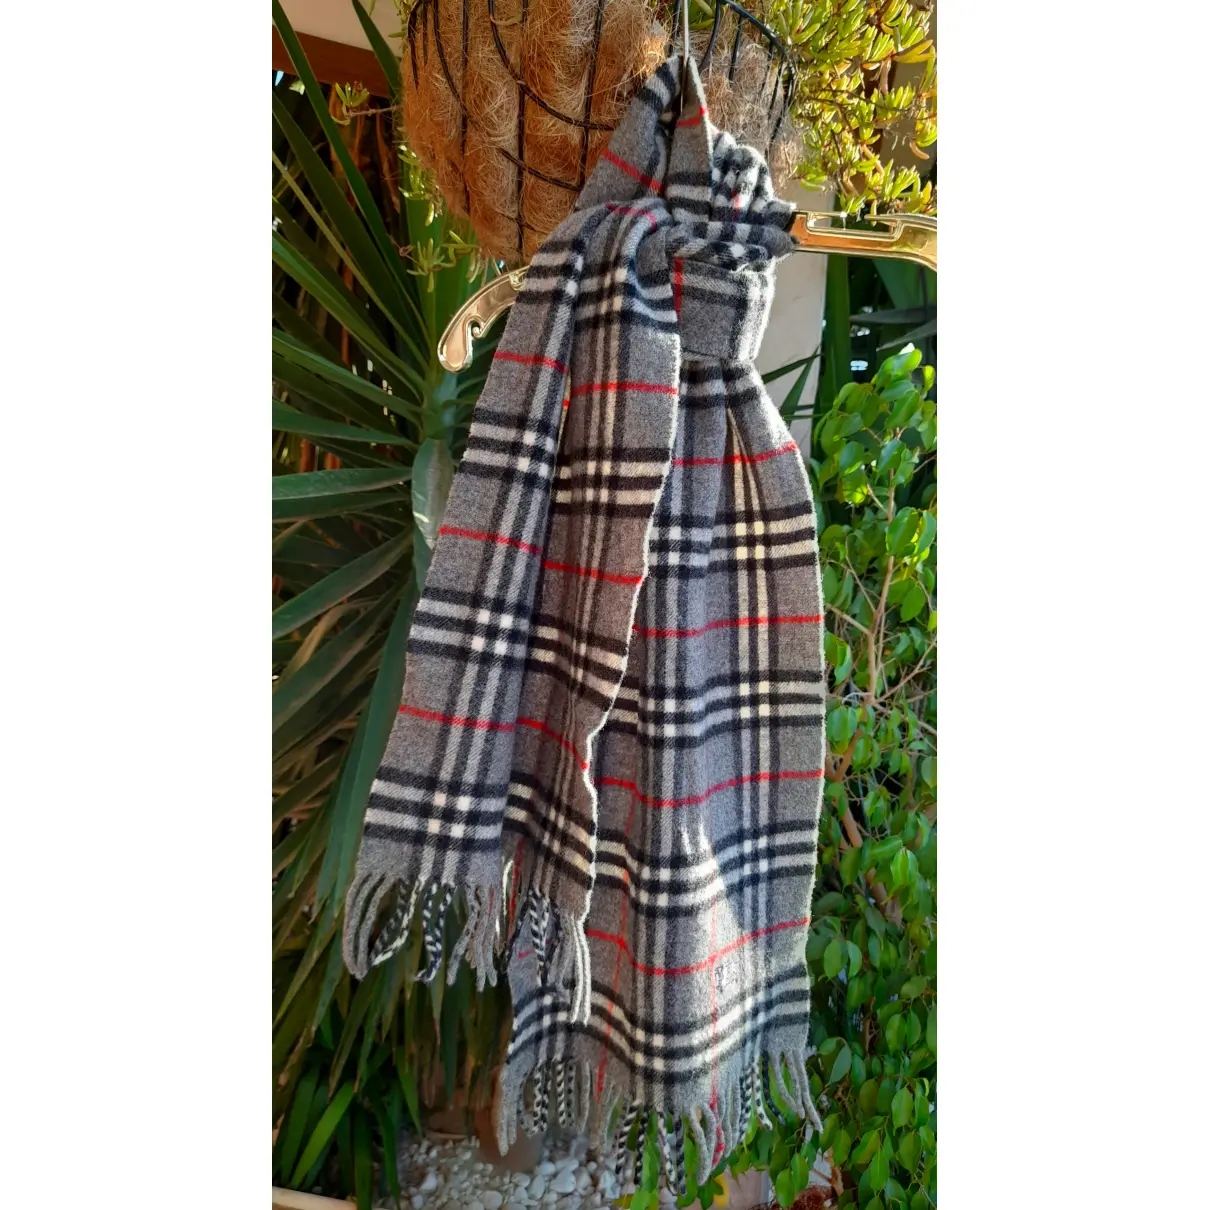 Buy Burberry Wool scarf & pocket square online